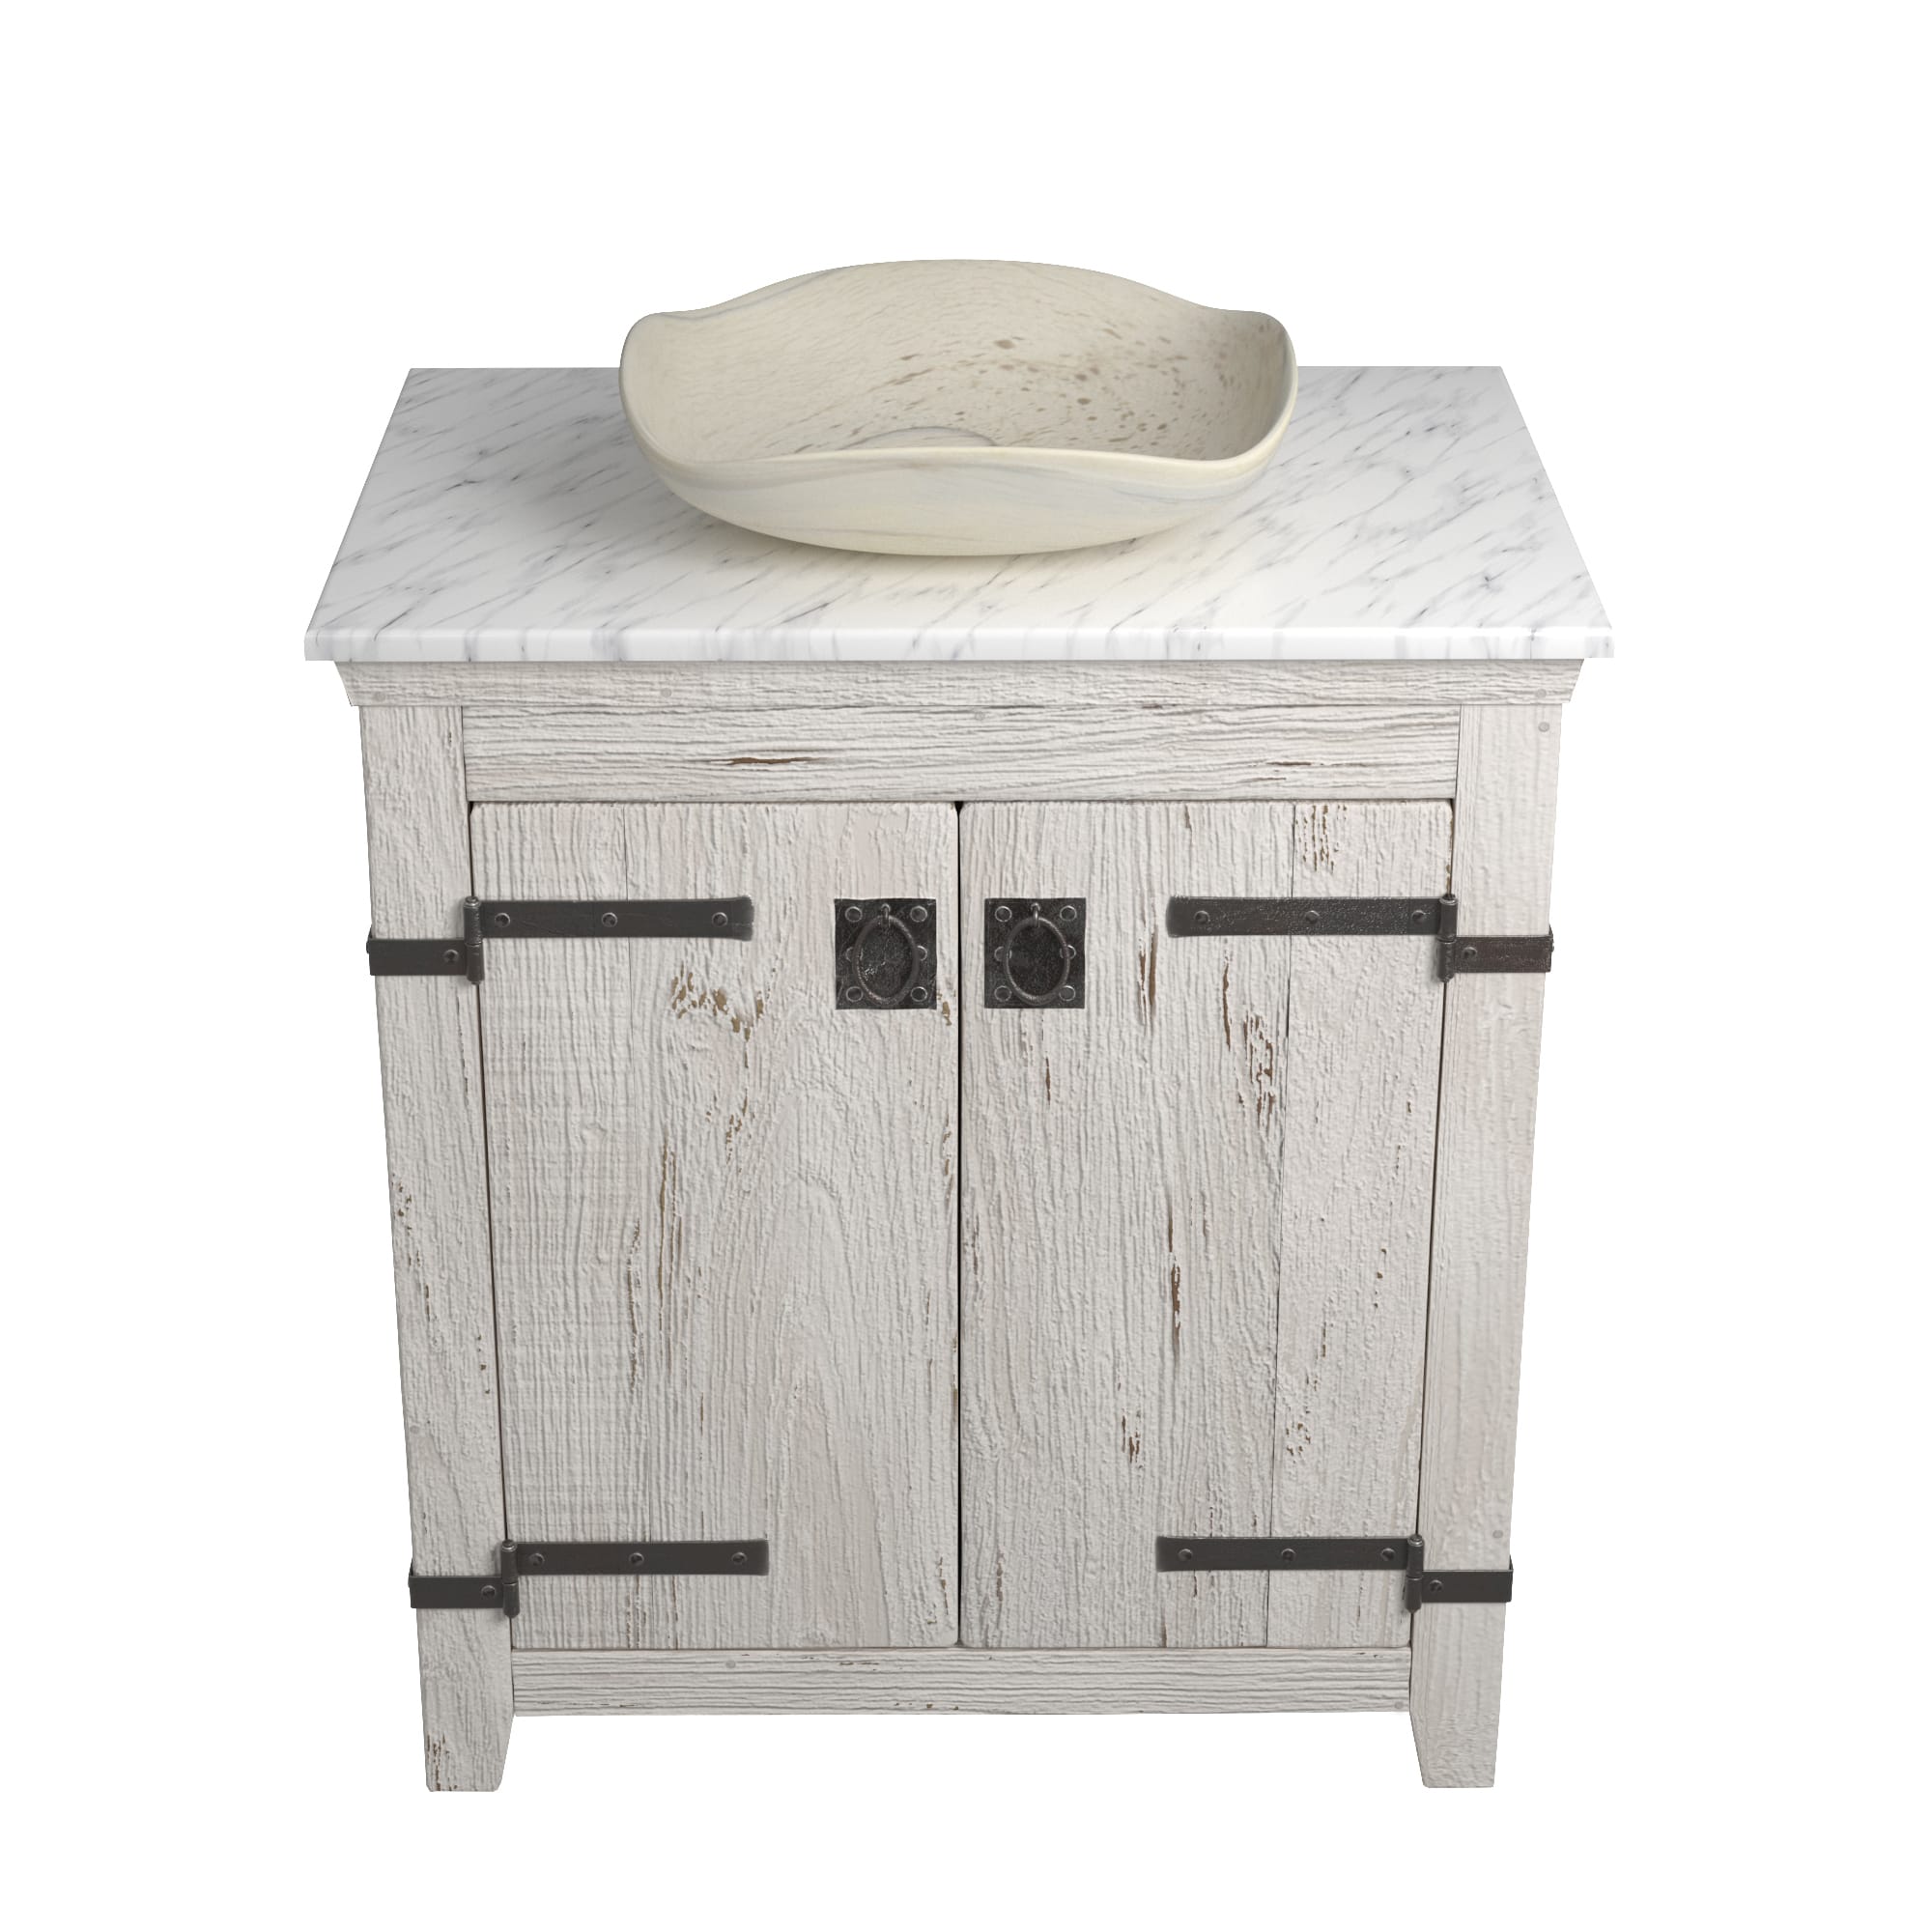 Native Trails 30" Americana Vanity in Whitewash with Carrara Marble Top and Lido in Beachcomber, No Faucet Hole, BND30-VB-CT-MG-018